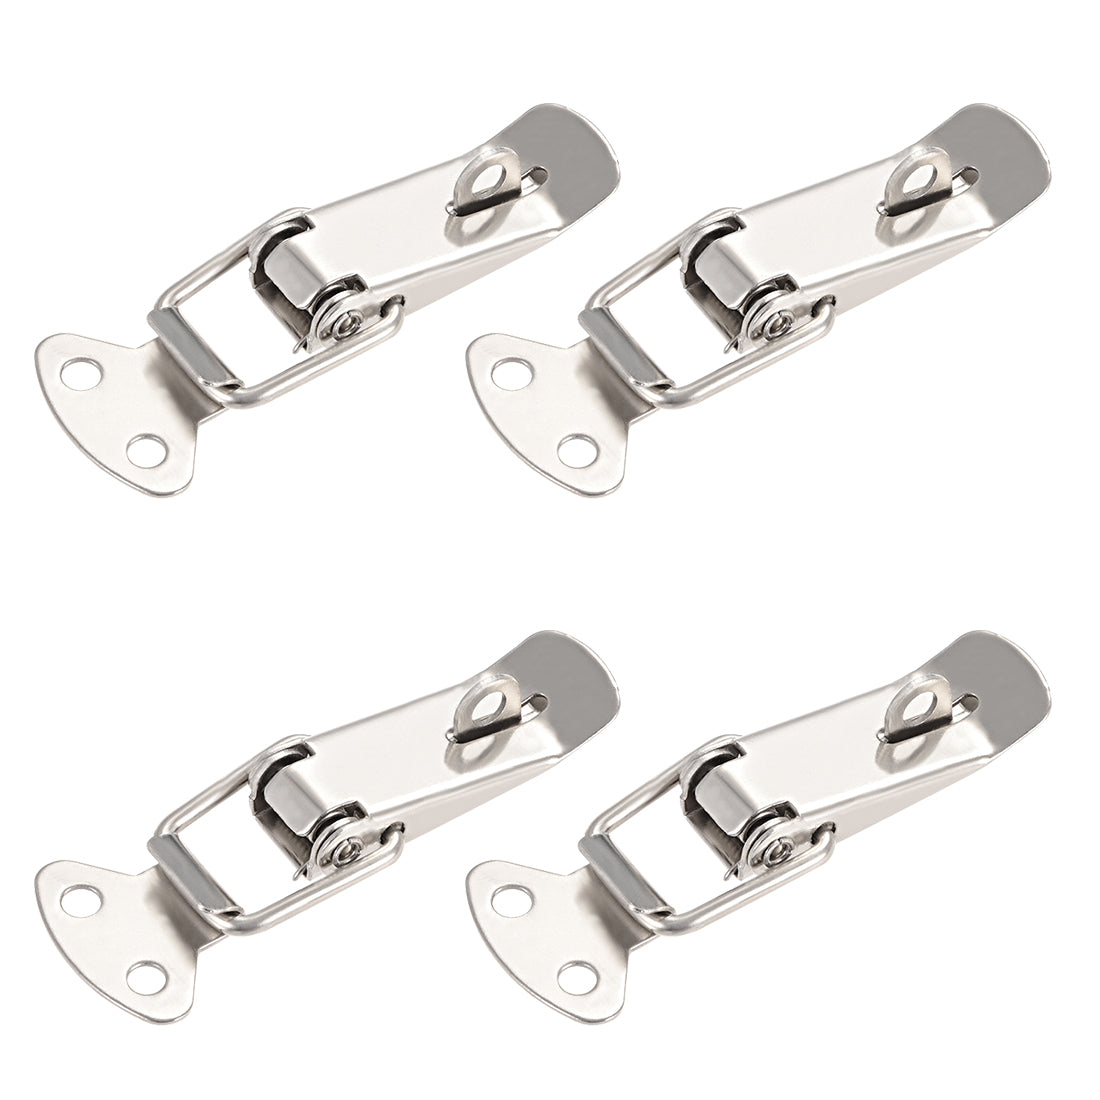 uxcell Uxcell 4 Pcs Iron Spring Loaded Toggle Case Box Chest Trunk Latch Catches Hasps Clamps, 72mm Overall Length